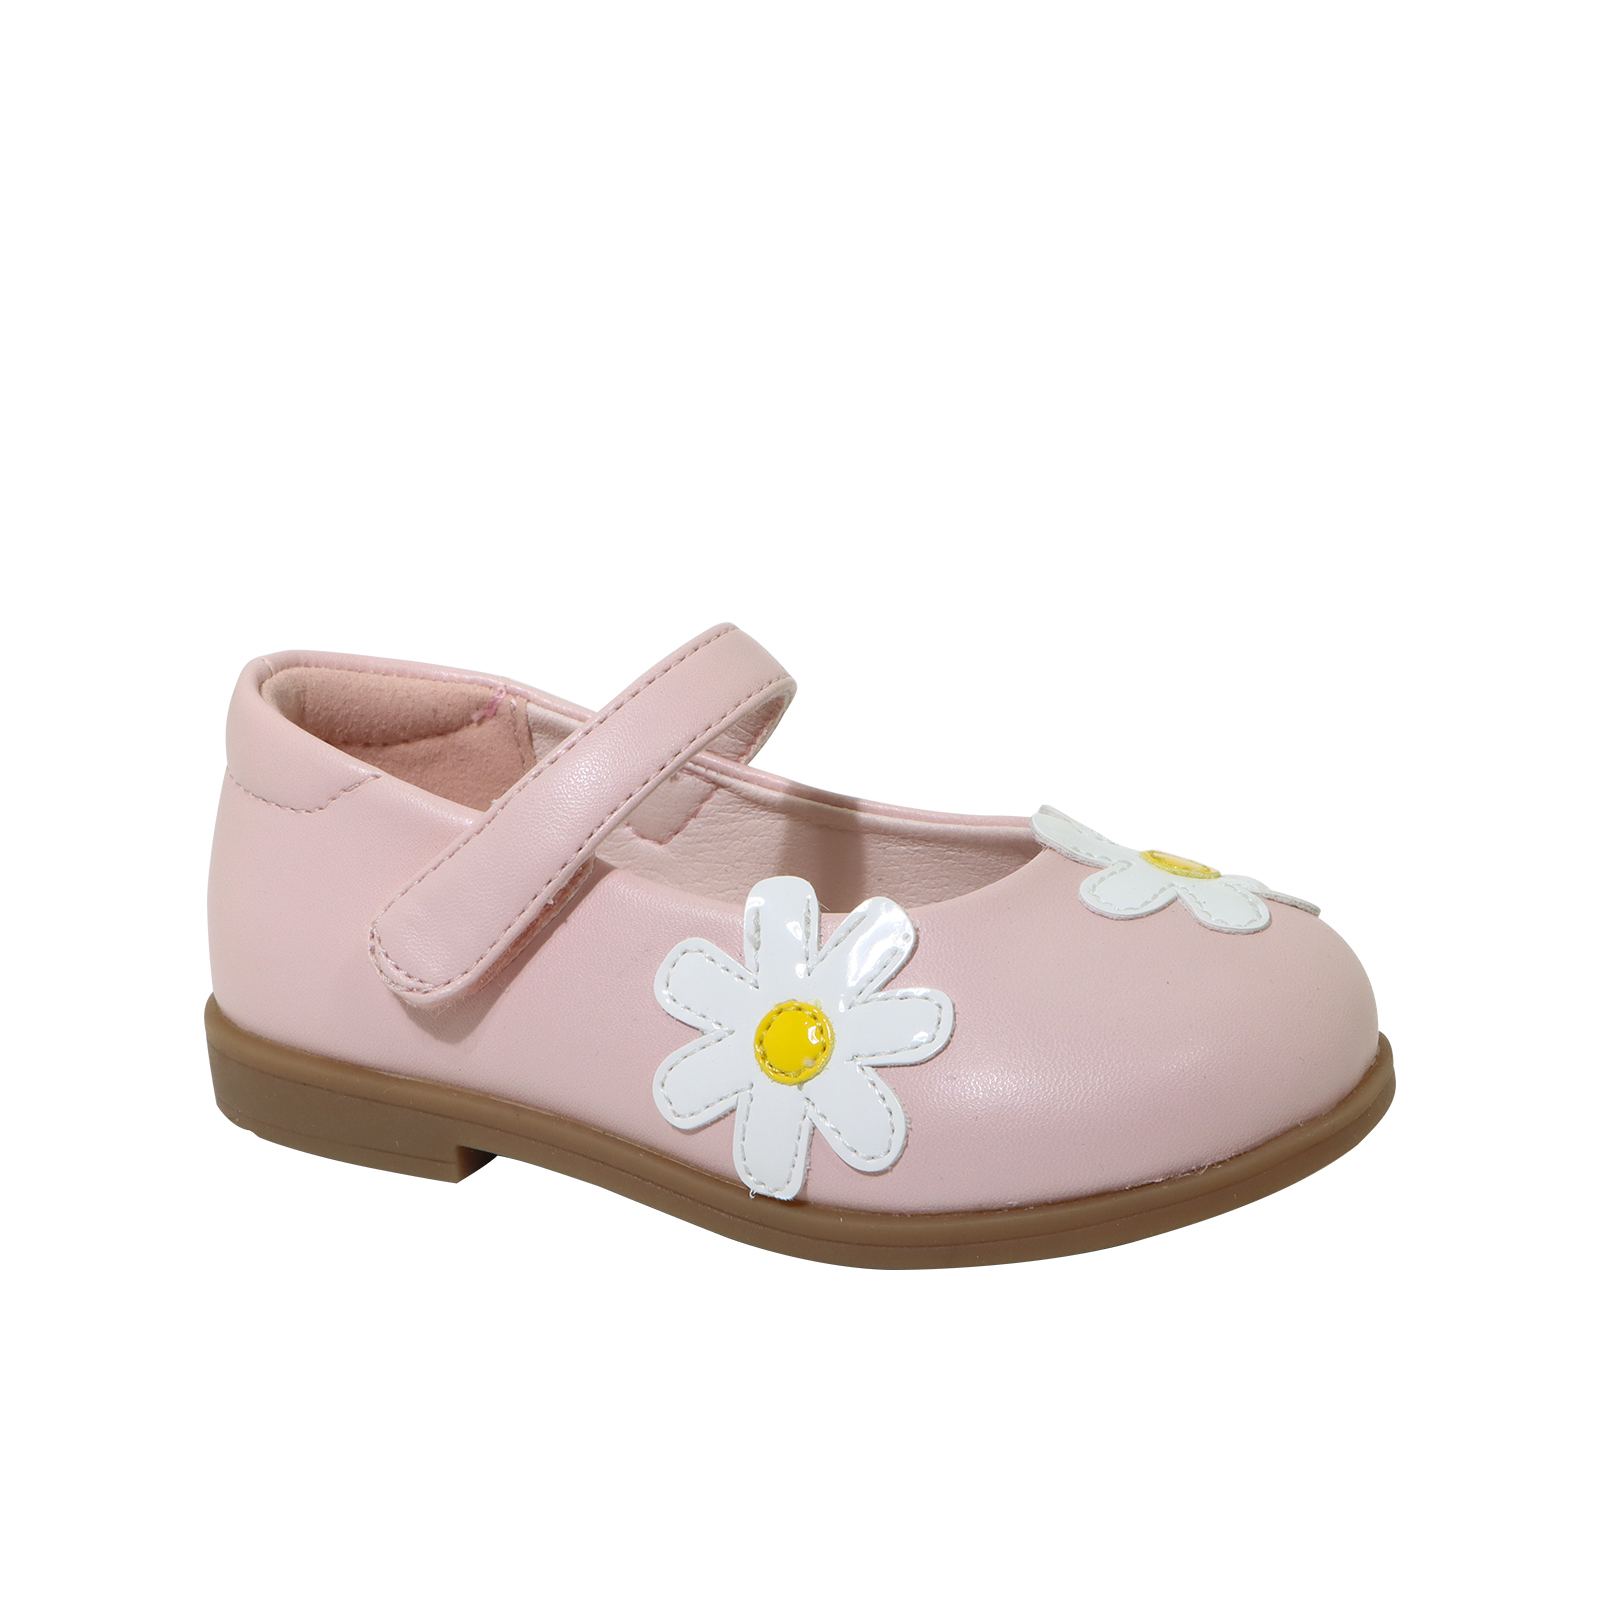 New designing for Children's fashion shool shoes